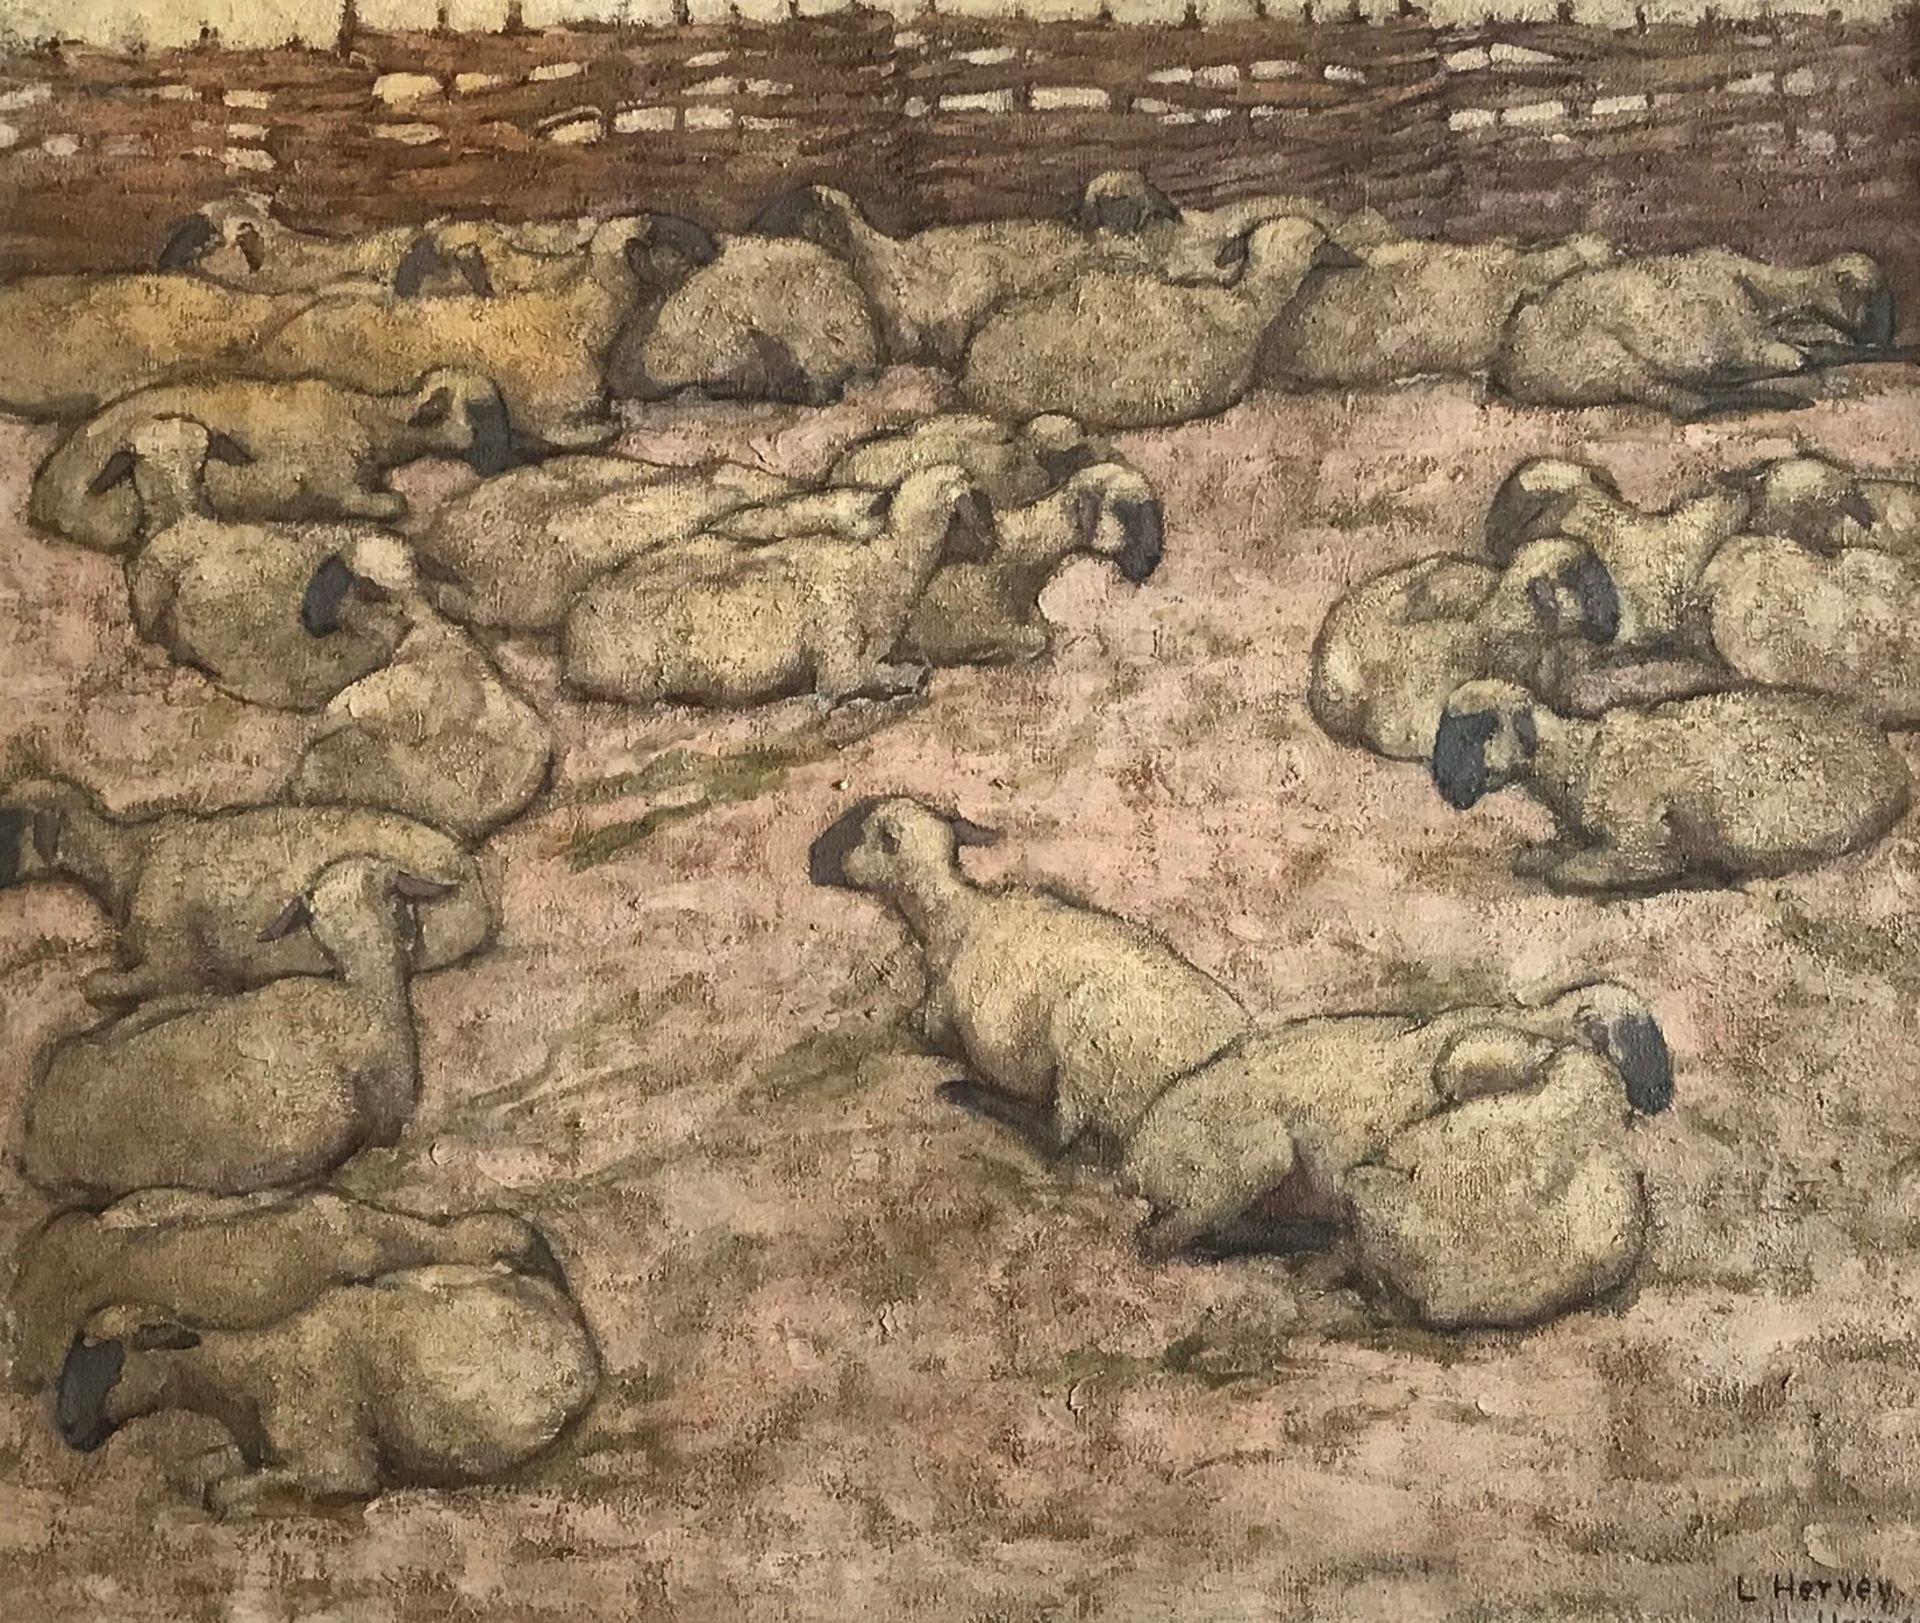 L Hervey Signed Oil On Canvas, Flock Of Sheep